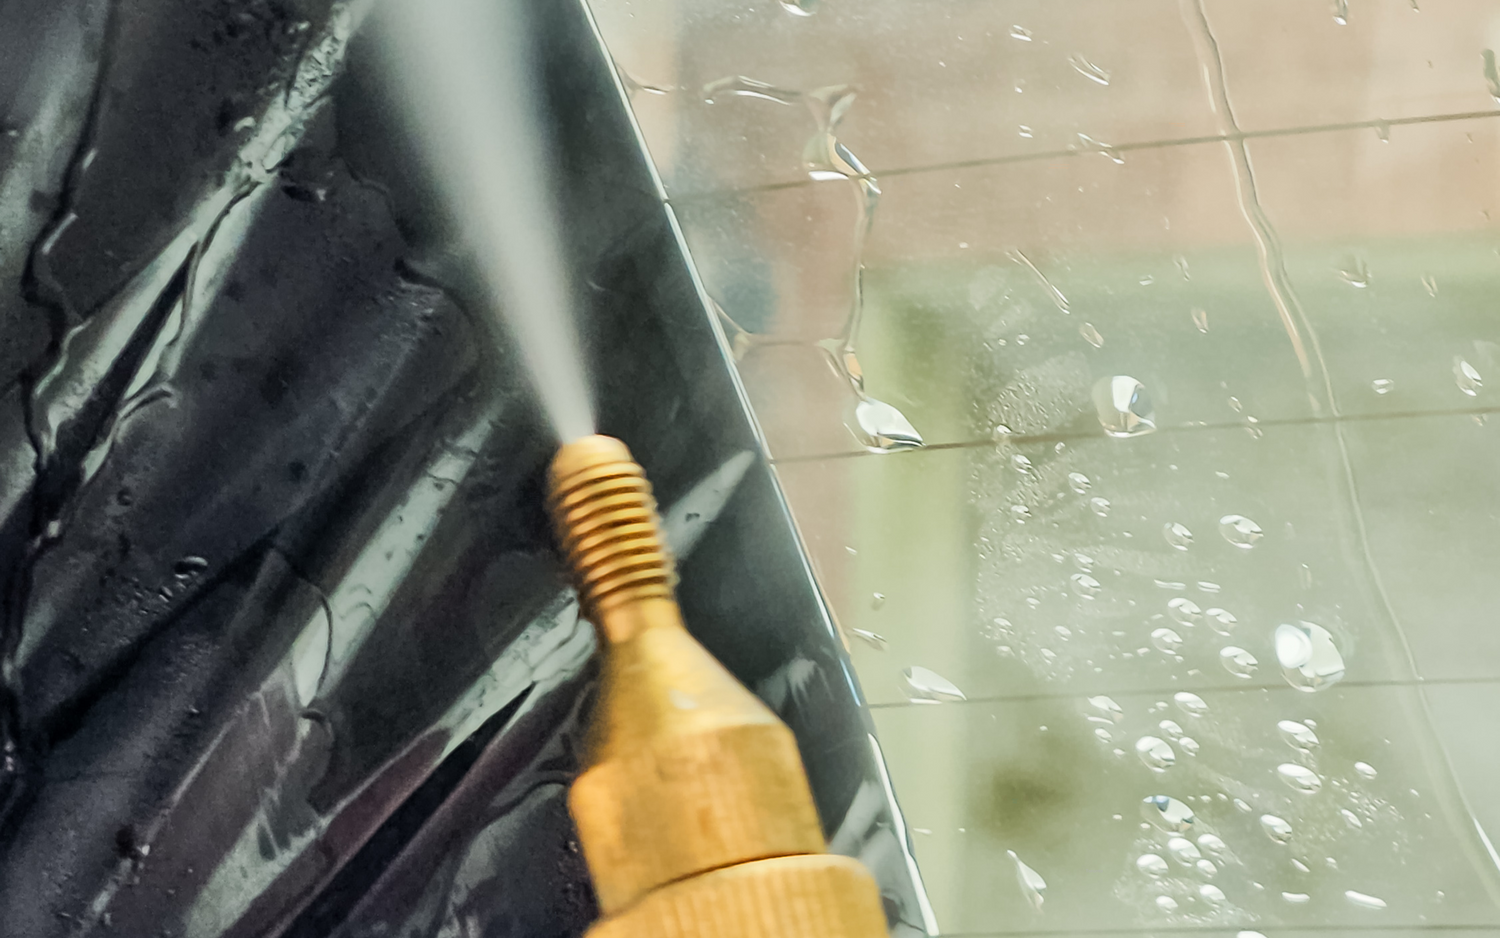 A steamer emitting steady streams of hot vapor, effectively softening the adhesive for easy window tint removal. This image serves as a practical visual guide on how to remove window tinting efficiently.